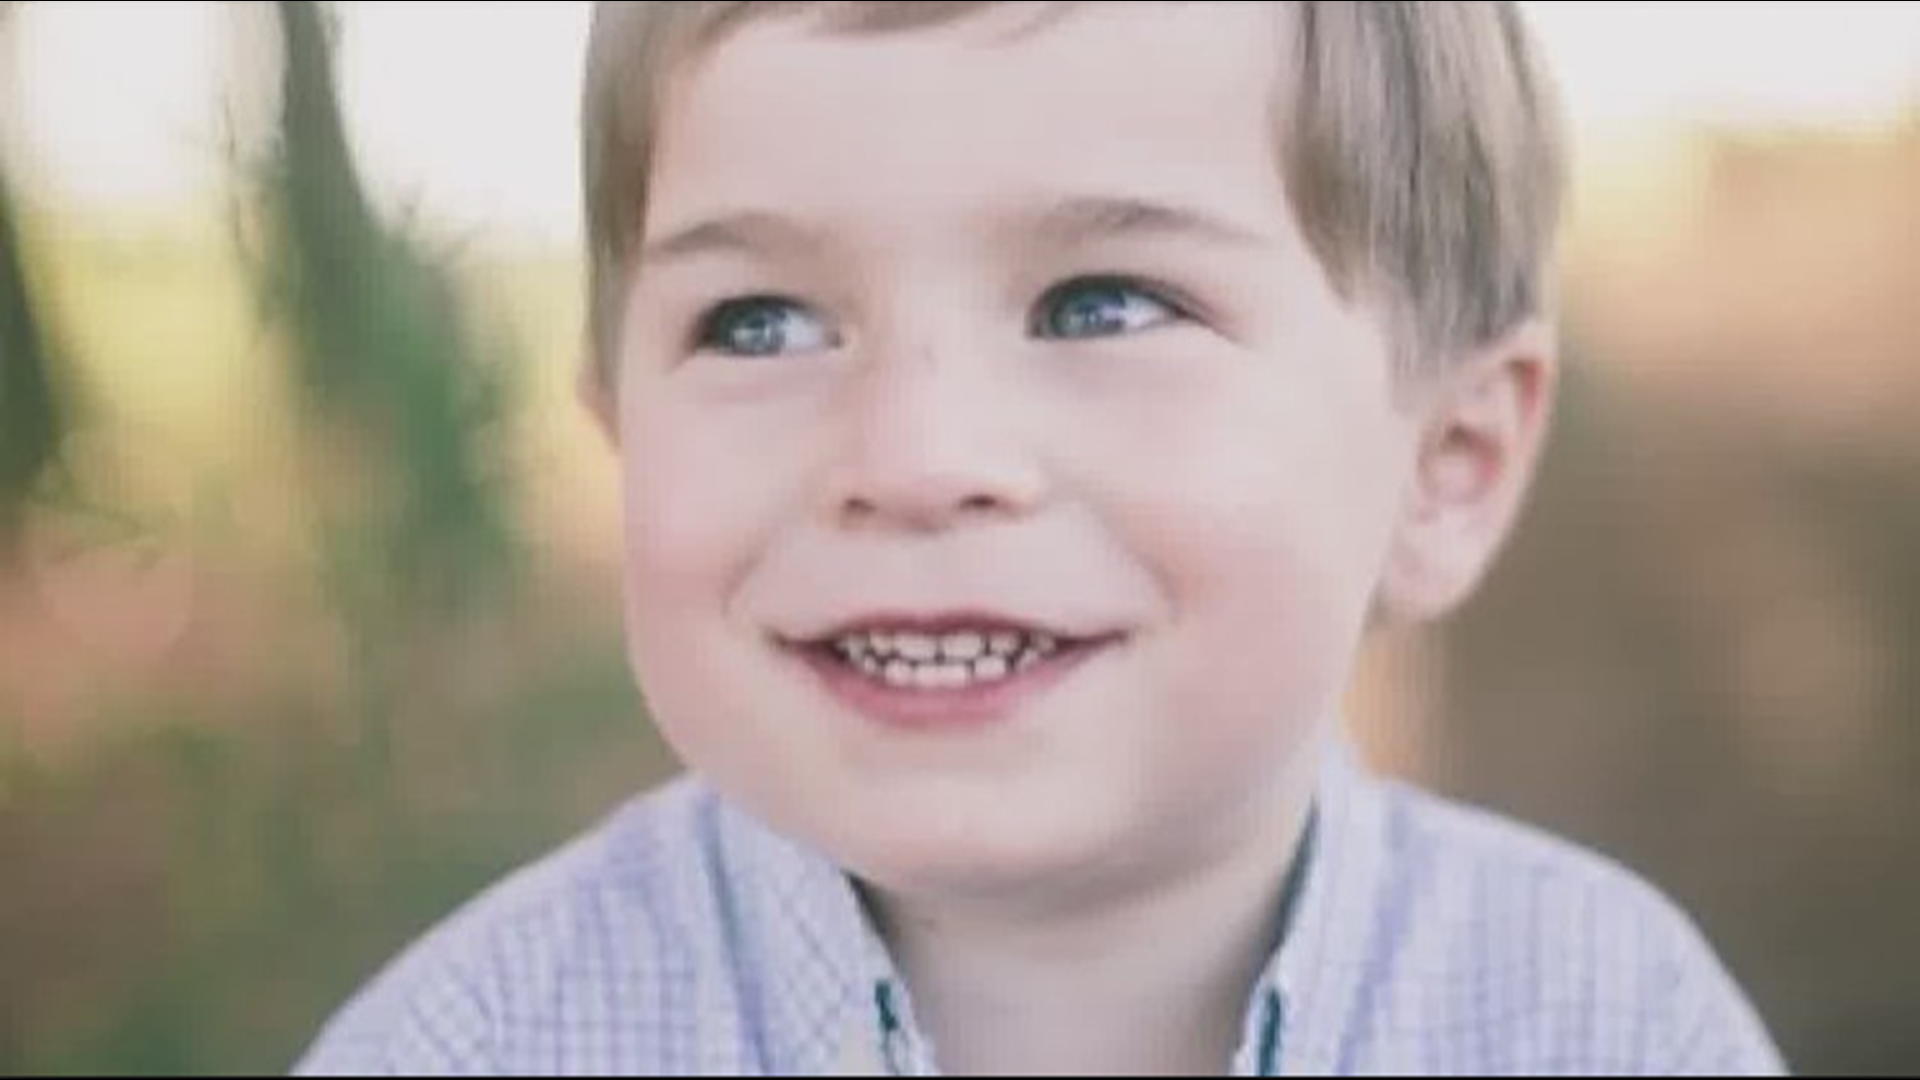 The vibrant 5-year-old died in a tragic accident in April of 2017. His family was enjoying a meal when Charlie wandered a few feet away and got trapped between the rotating portion of the restaurants floor and a wall.